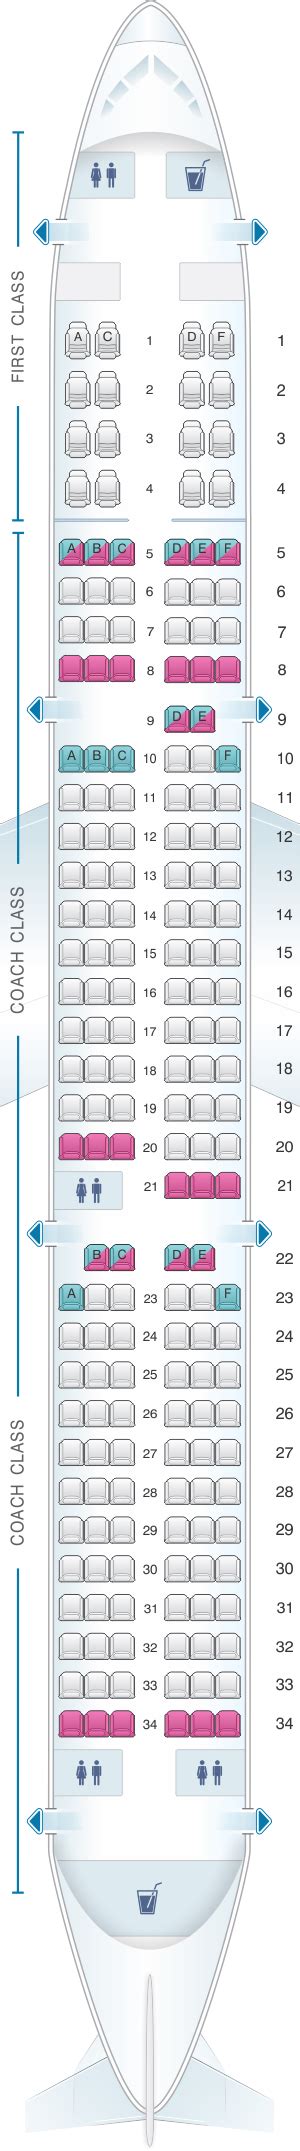 Airbus a321 seating map. Herndon, Virginia, 3 October 2023 - United Airlines has placed an order for 60 additional Airbus A321neo aircraft, supporting the airline's "United Next" initiative to integrate new aircraft into its fleet and standardizing and enhancing its global network. United previously ordered 50 A321XLR and 70 A321neo aircraft. With this new order, the airline's direct purchase commitment from ... 